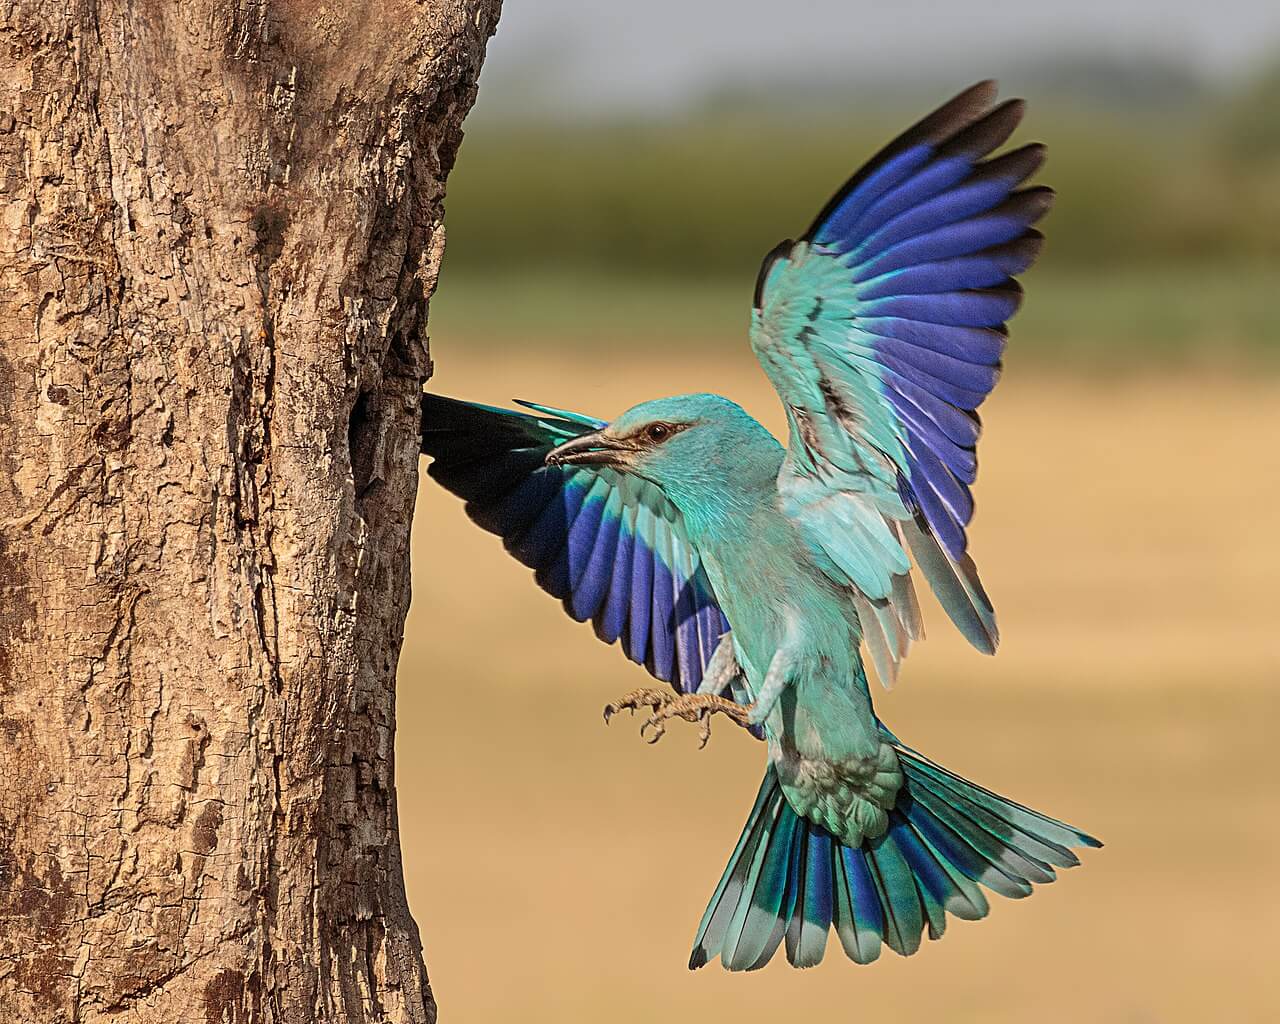 A European roller carrying food to its young in a tree.